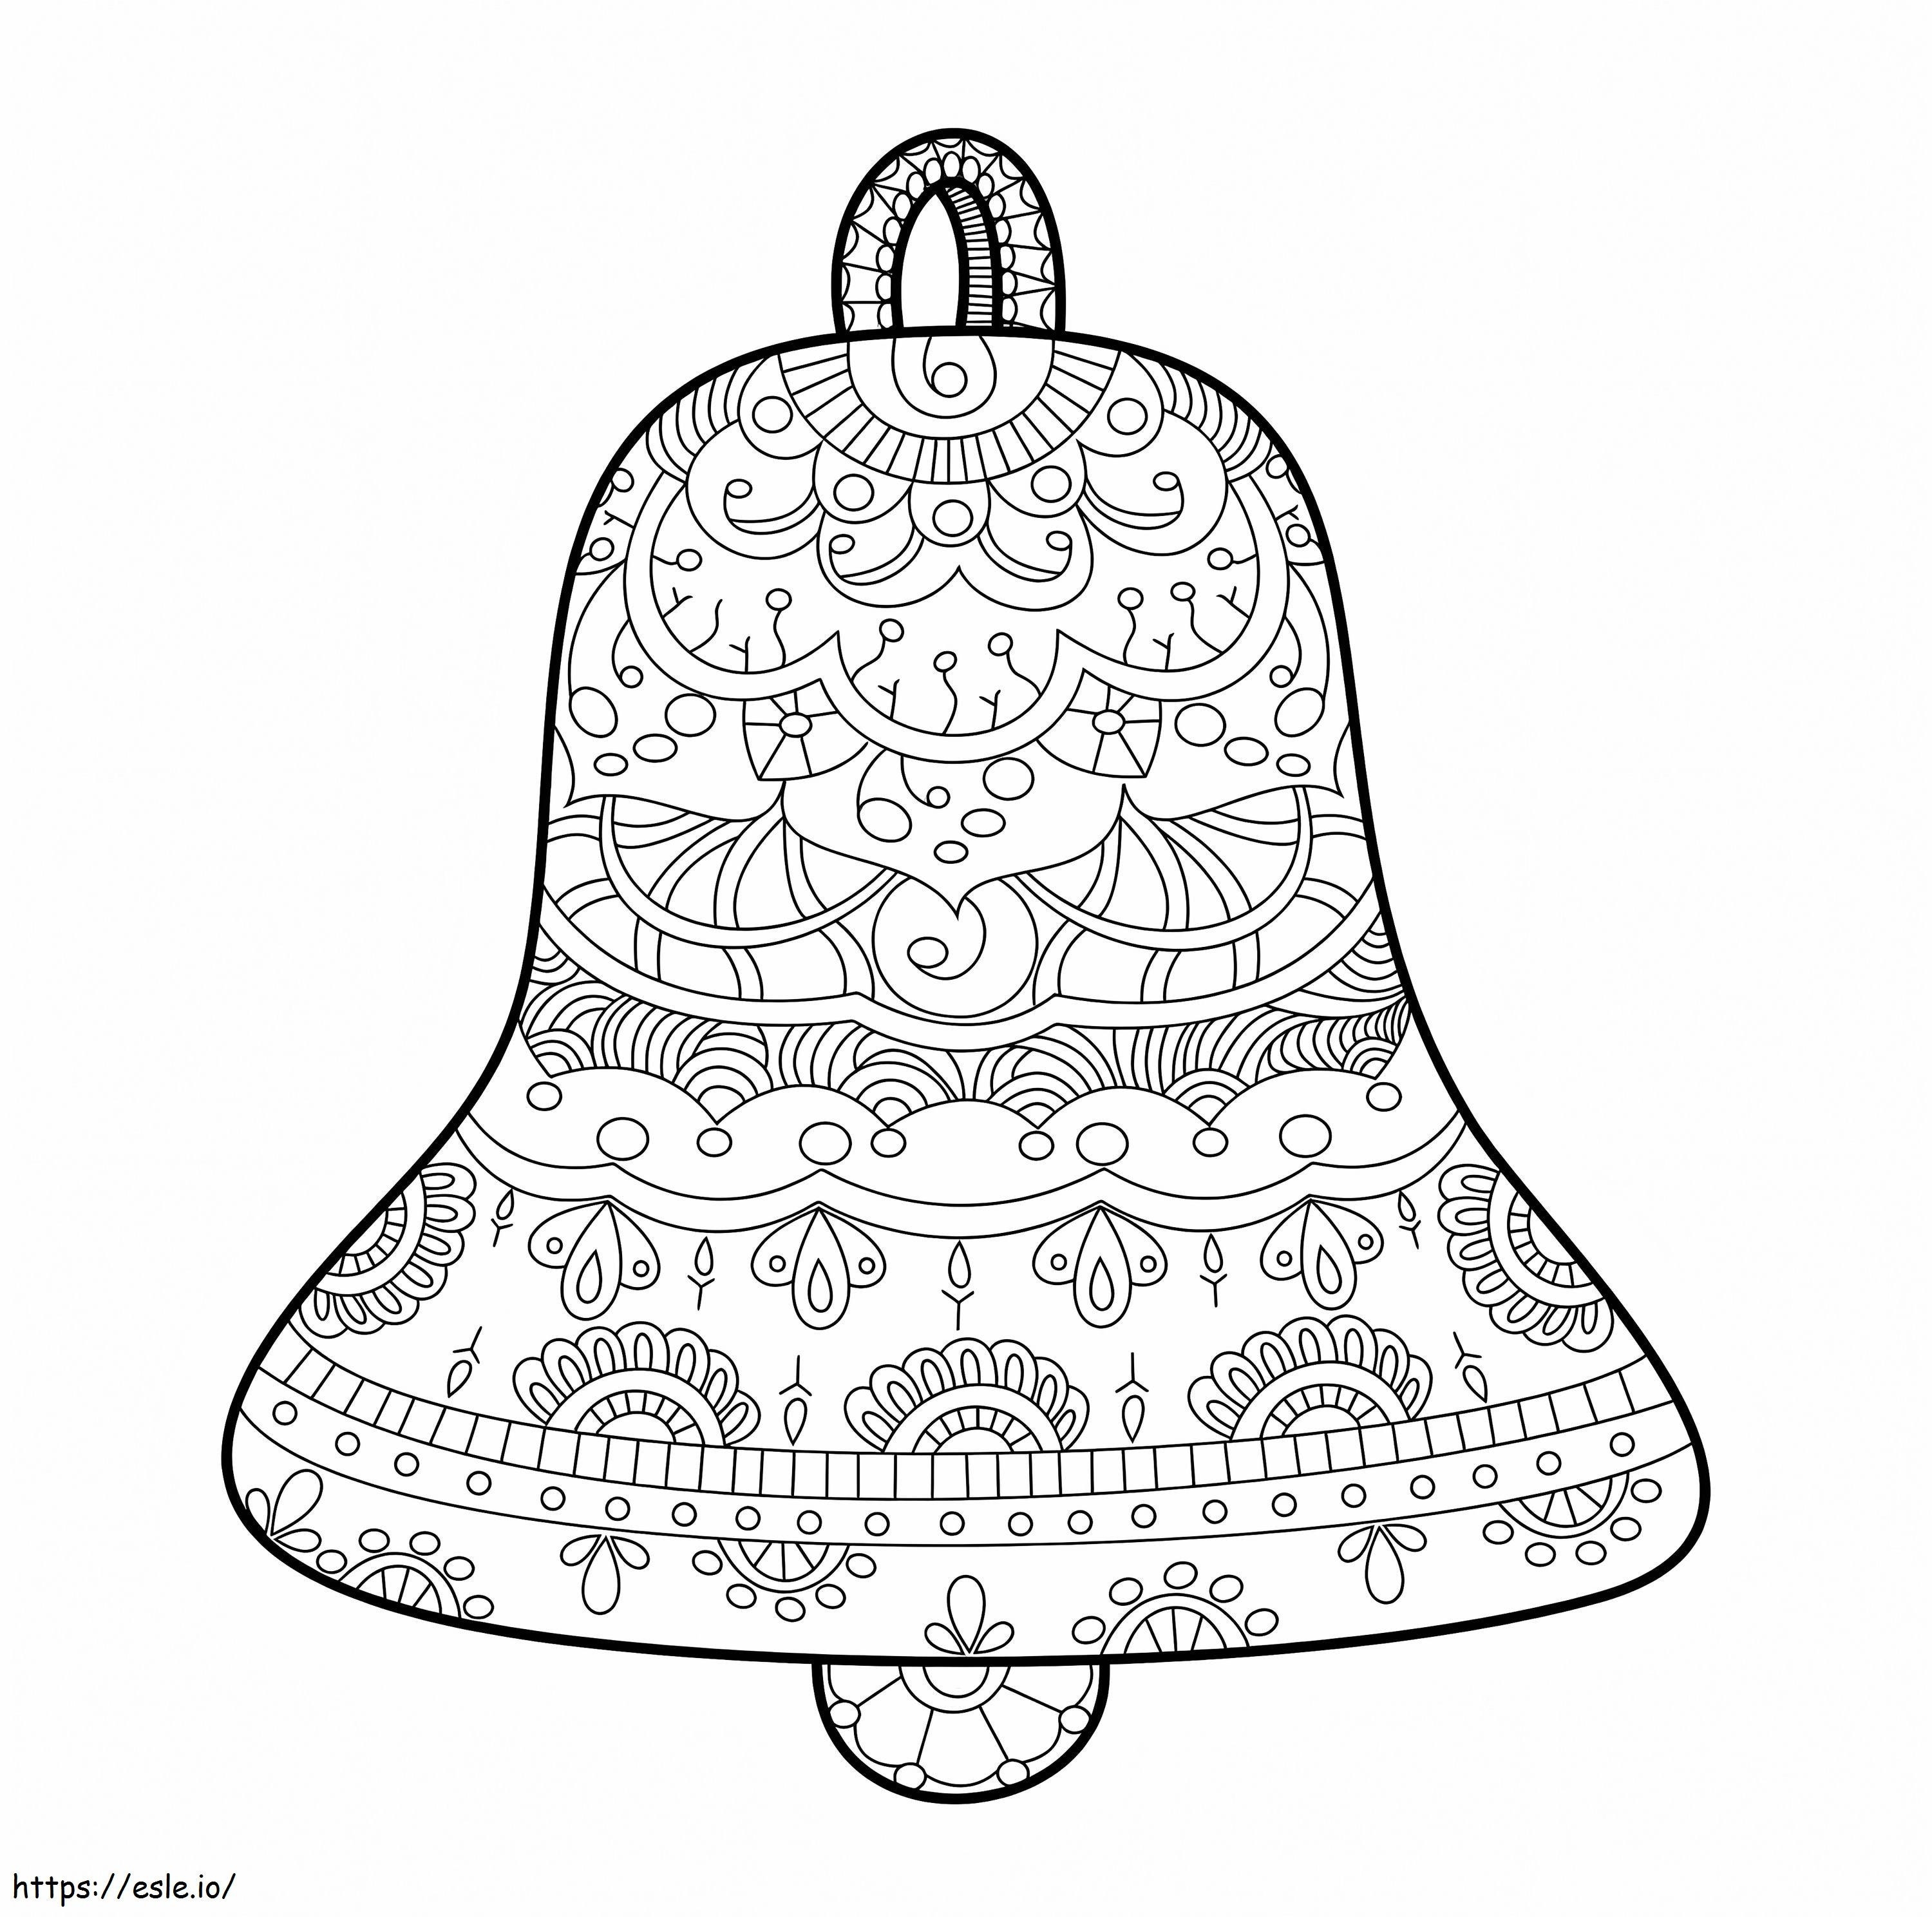 Bell Is For Adults coloring page